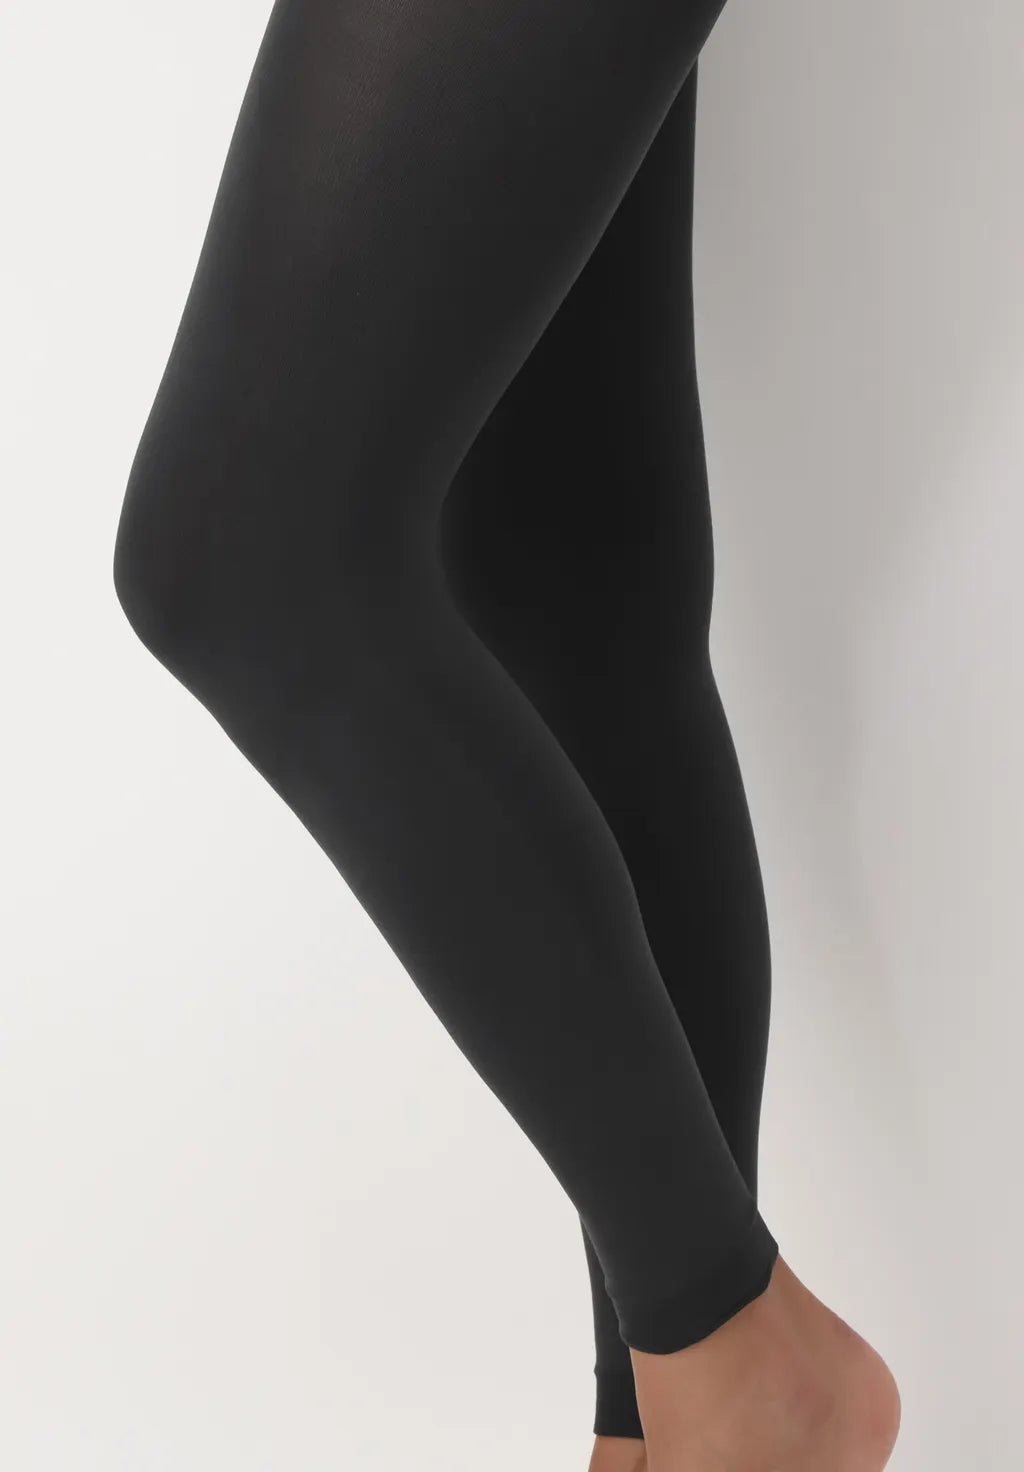 OroblÌ_ All Colors 120 Leggings - Dark grey ultra opaque soft matte footless tights with flat seams, gusset and deep waist band.